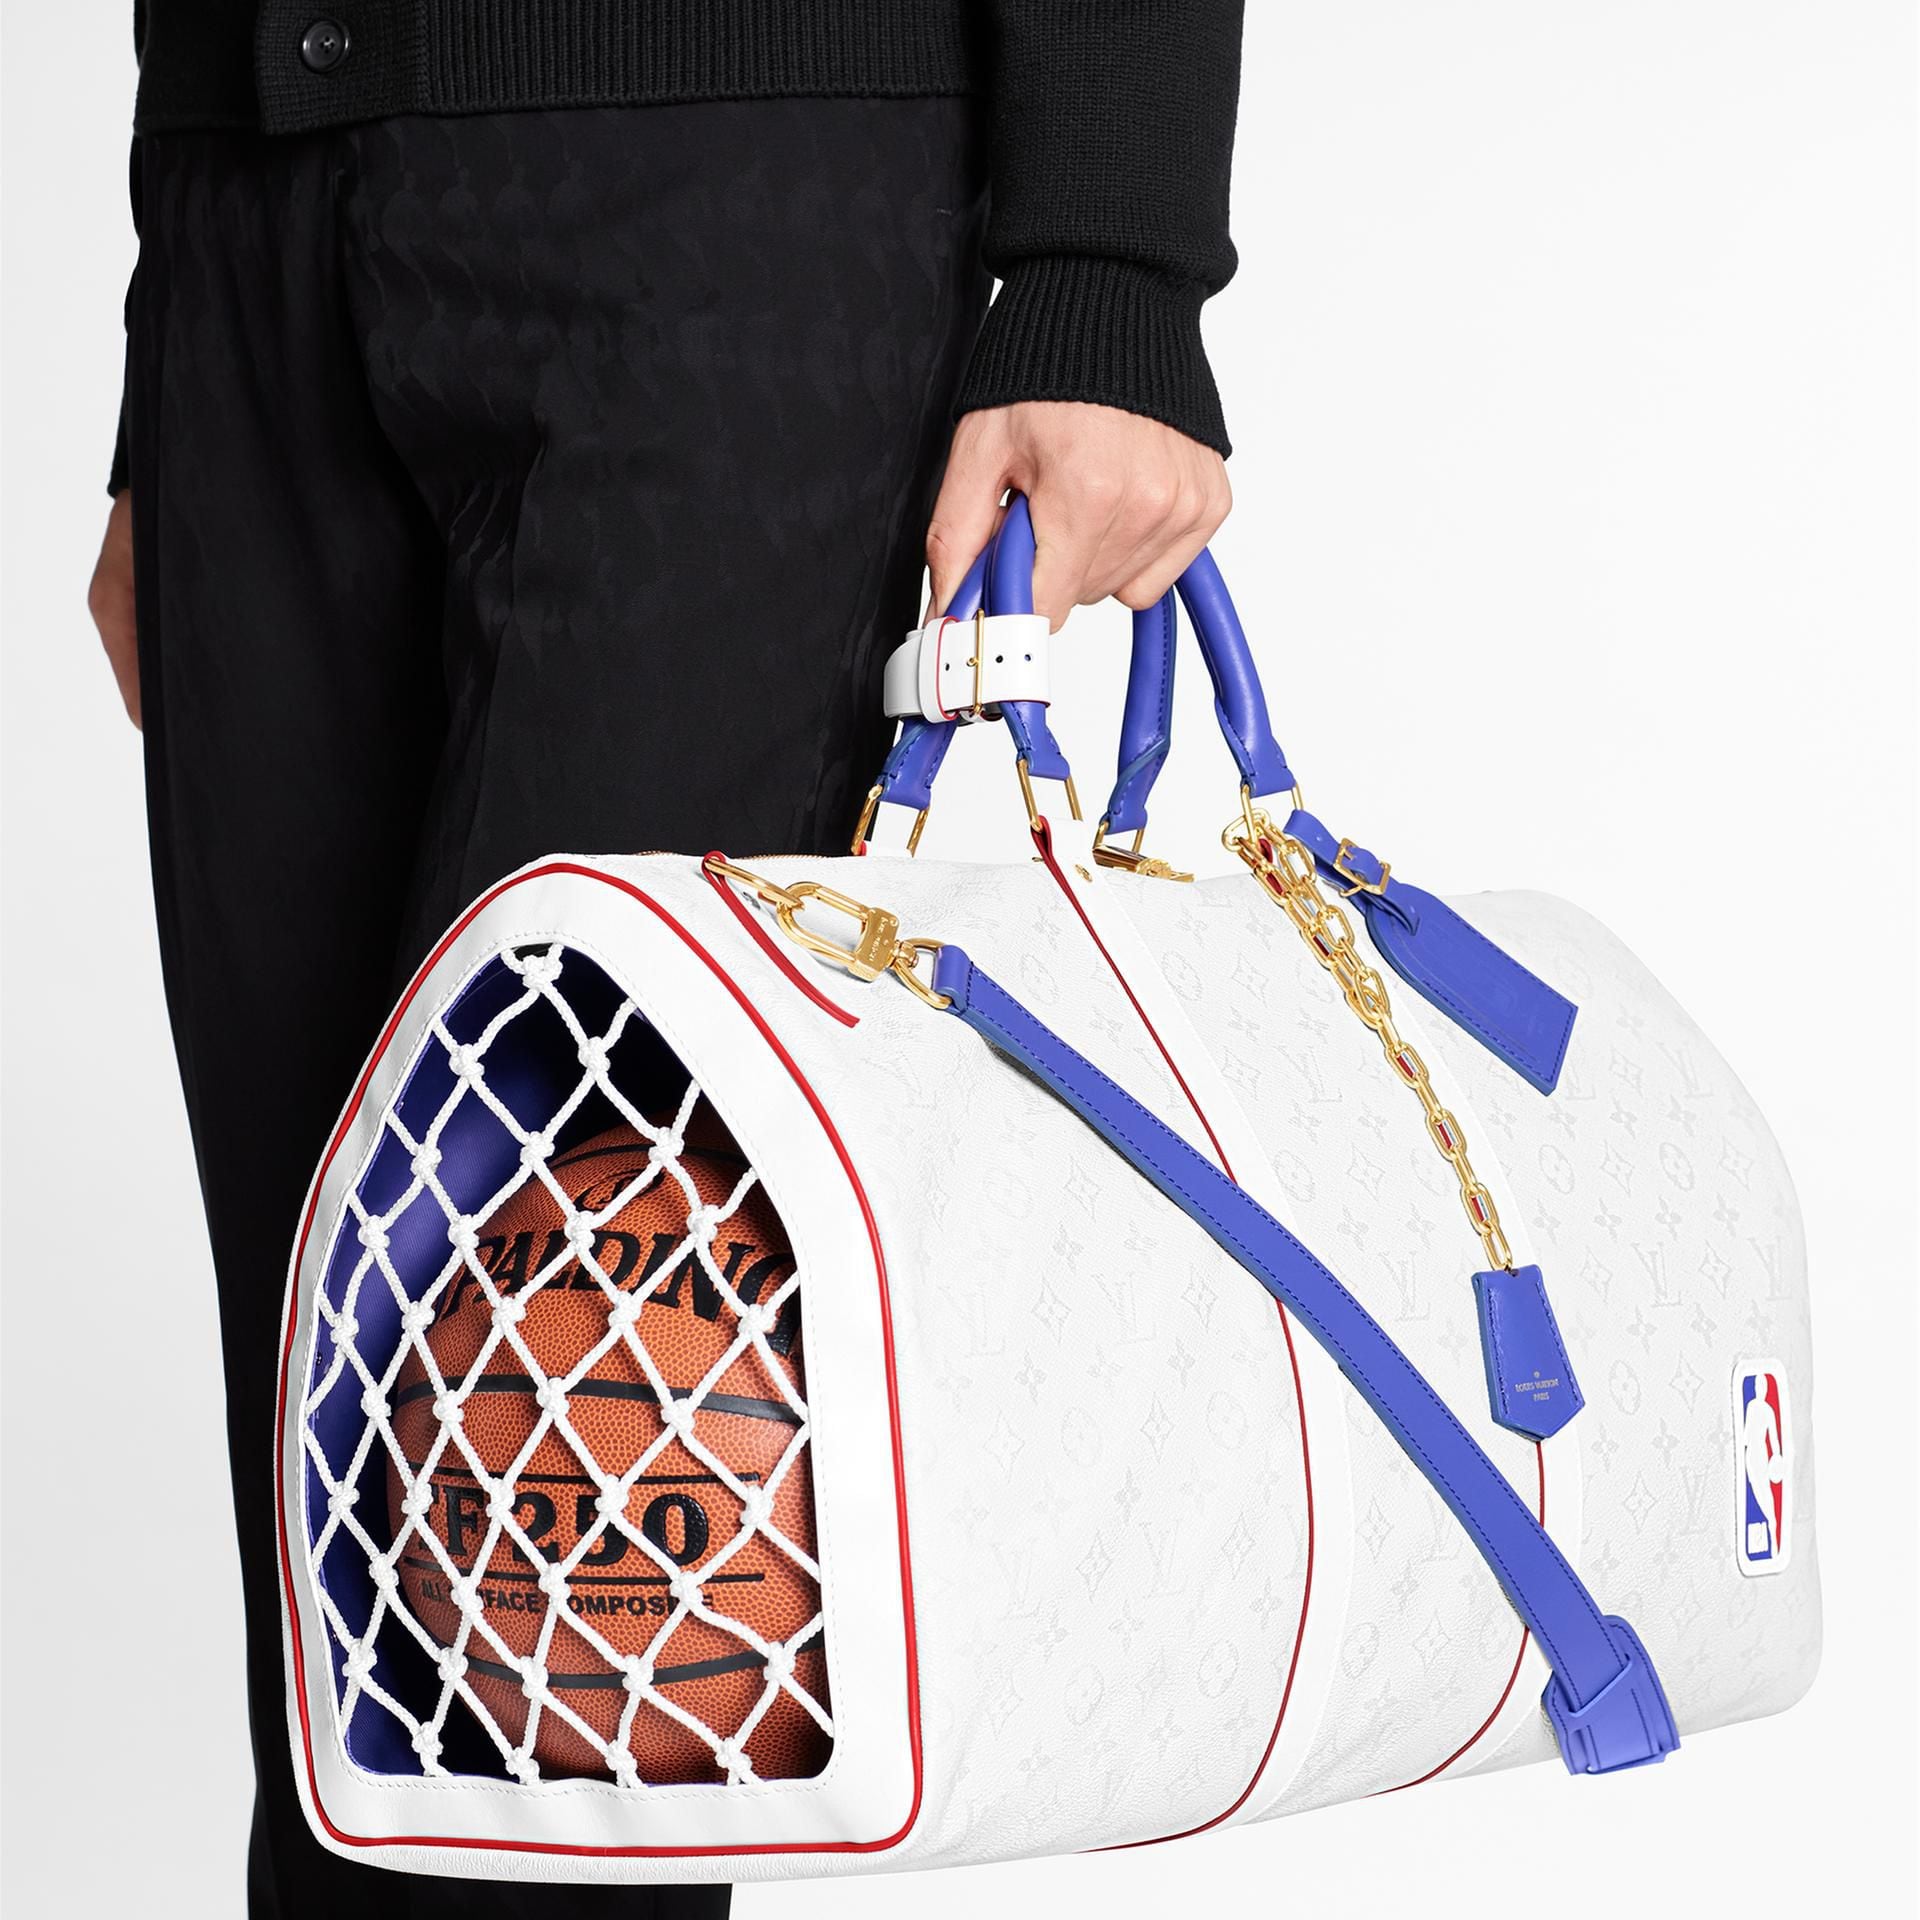 NBA on Instagram: @louisvuitton and the NBA announced a global